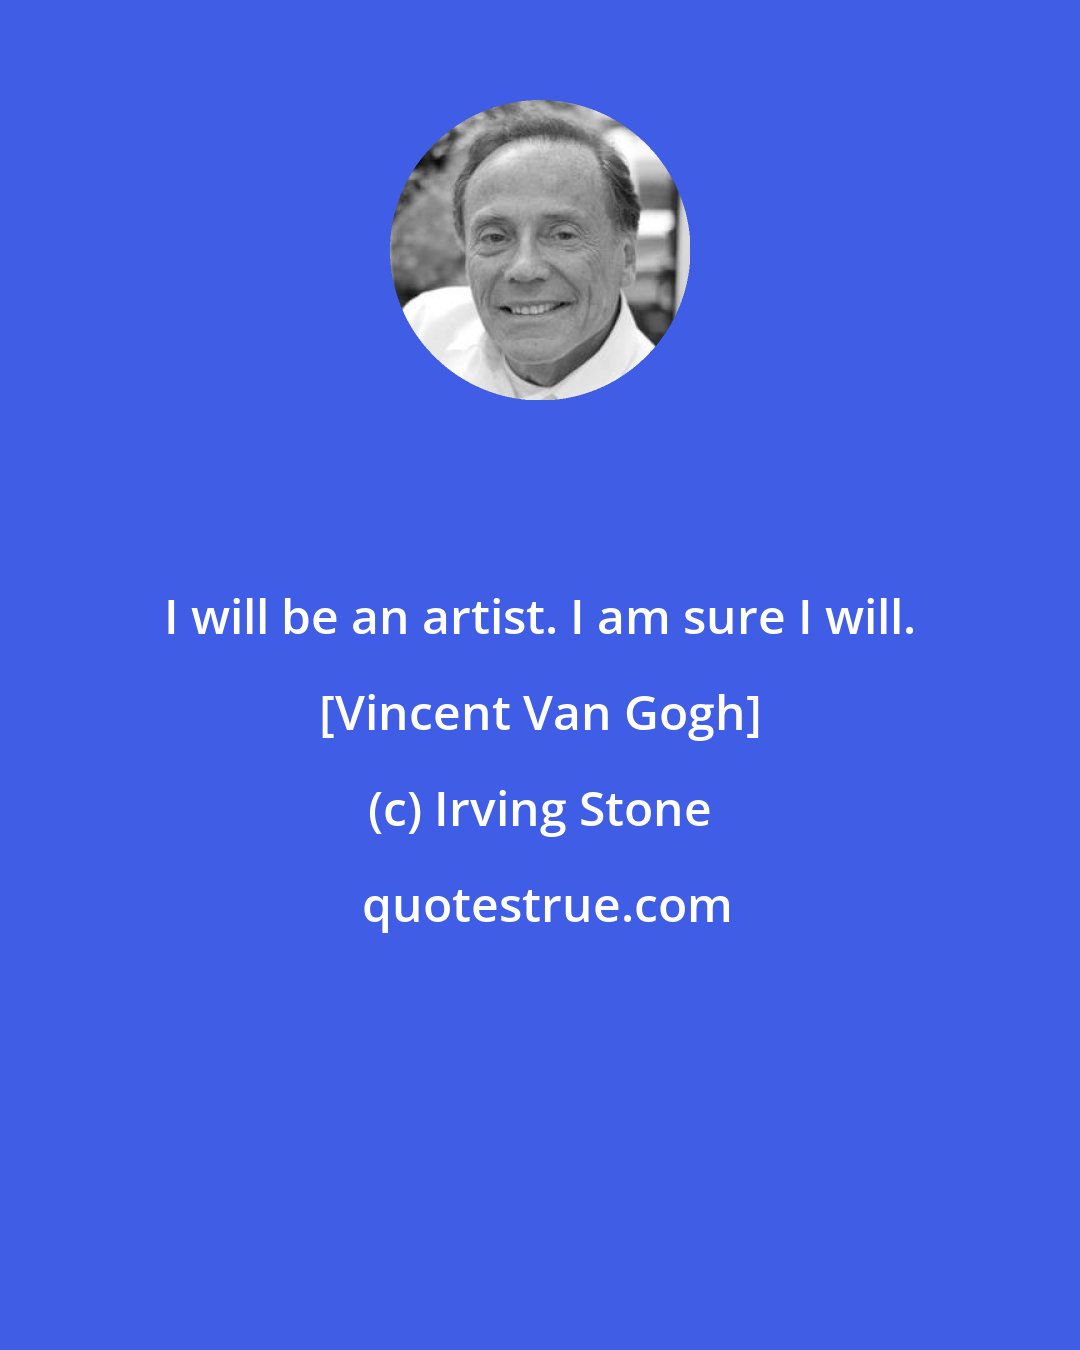 Irving Stone: I will be an artist. I am sure I will. [Vincent Van Gogh]